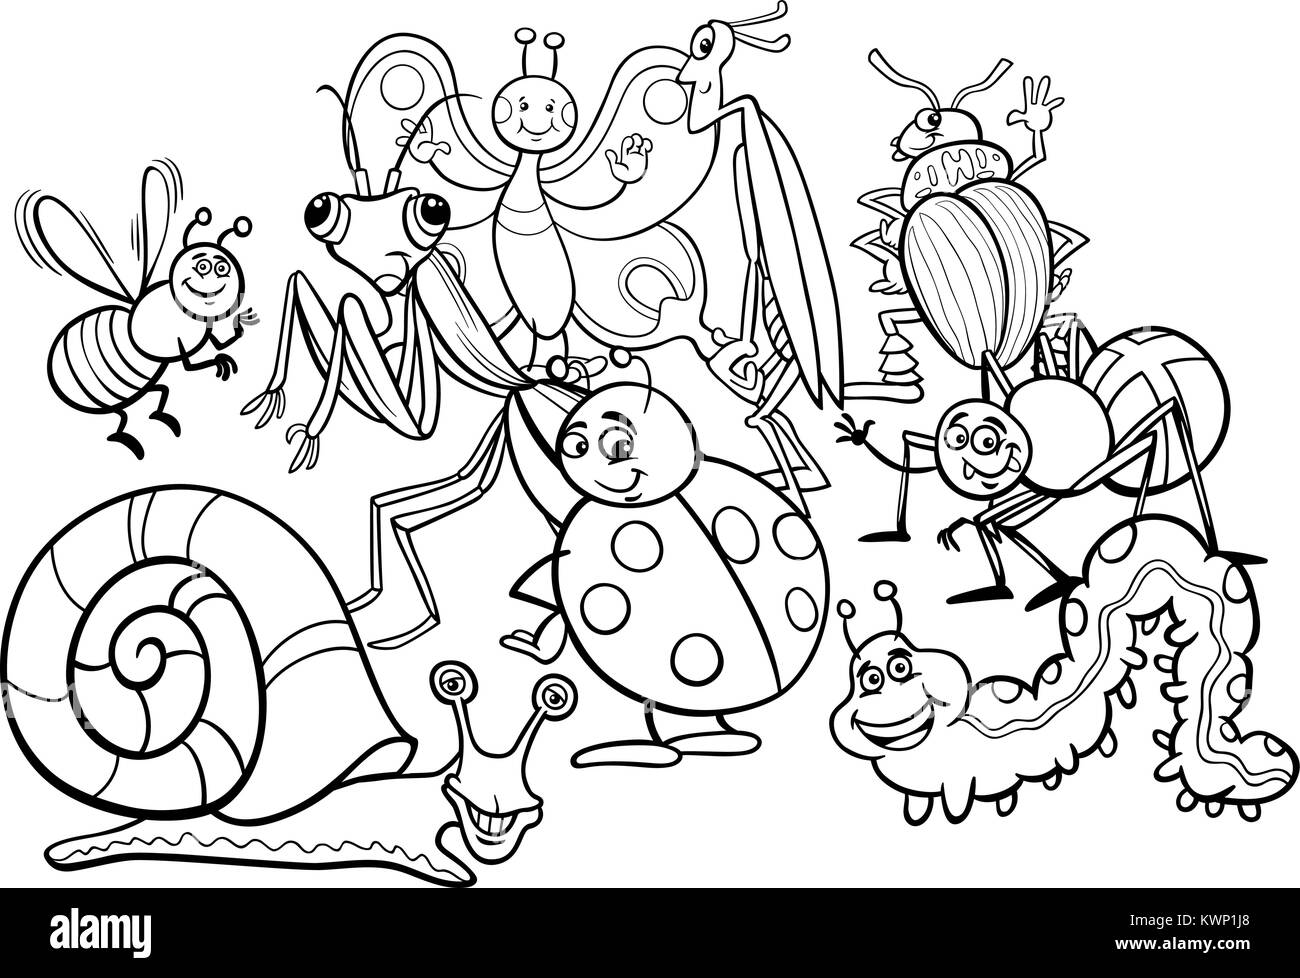 Black and White Cartoon Illustration of Insects and Bugs Animal Comic Characters Group Coloring Book Stock Vector